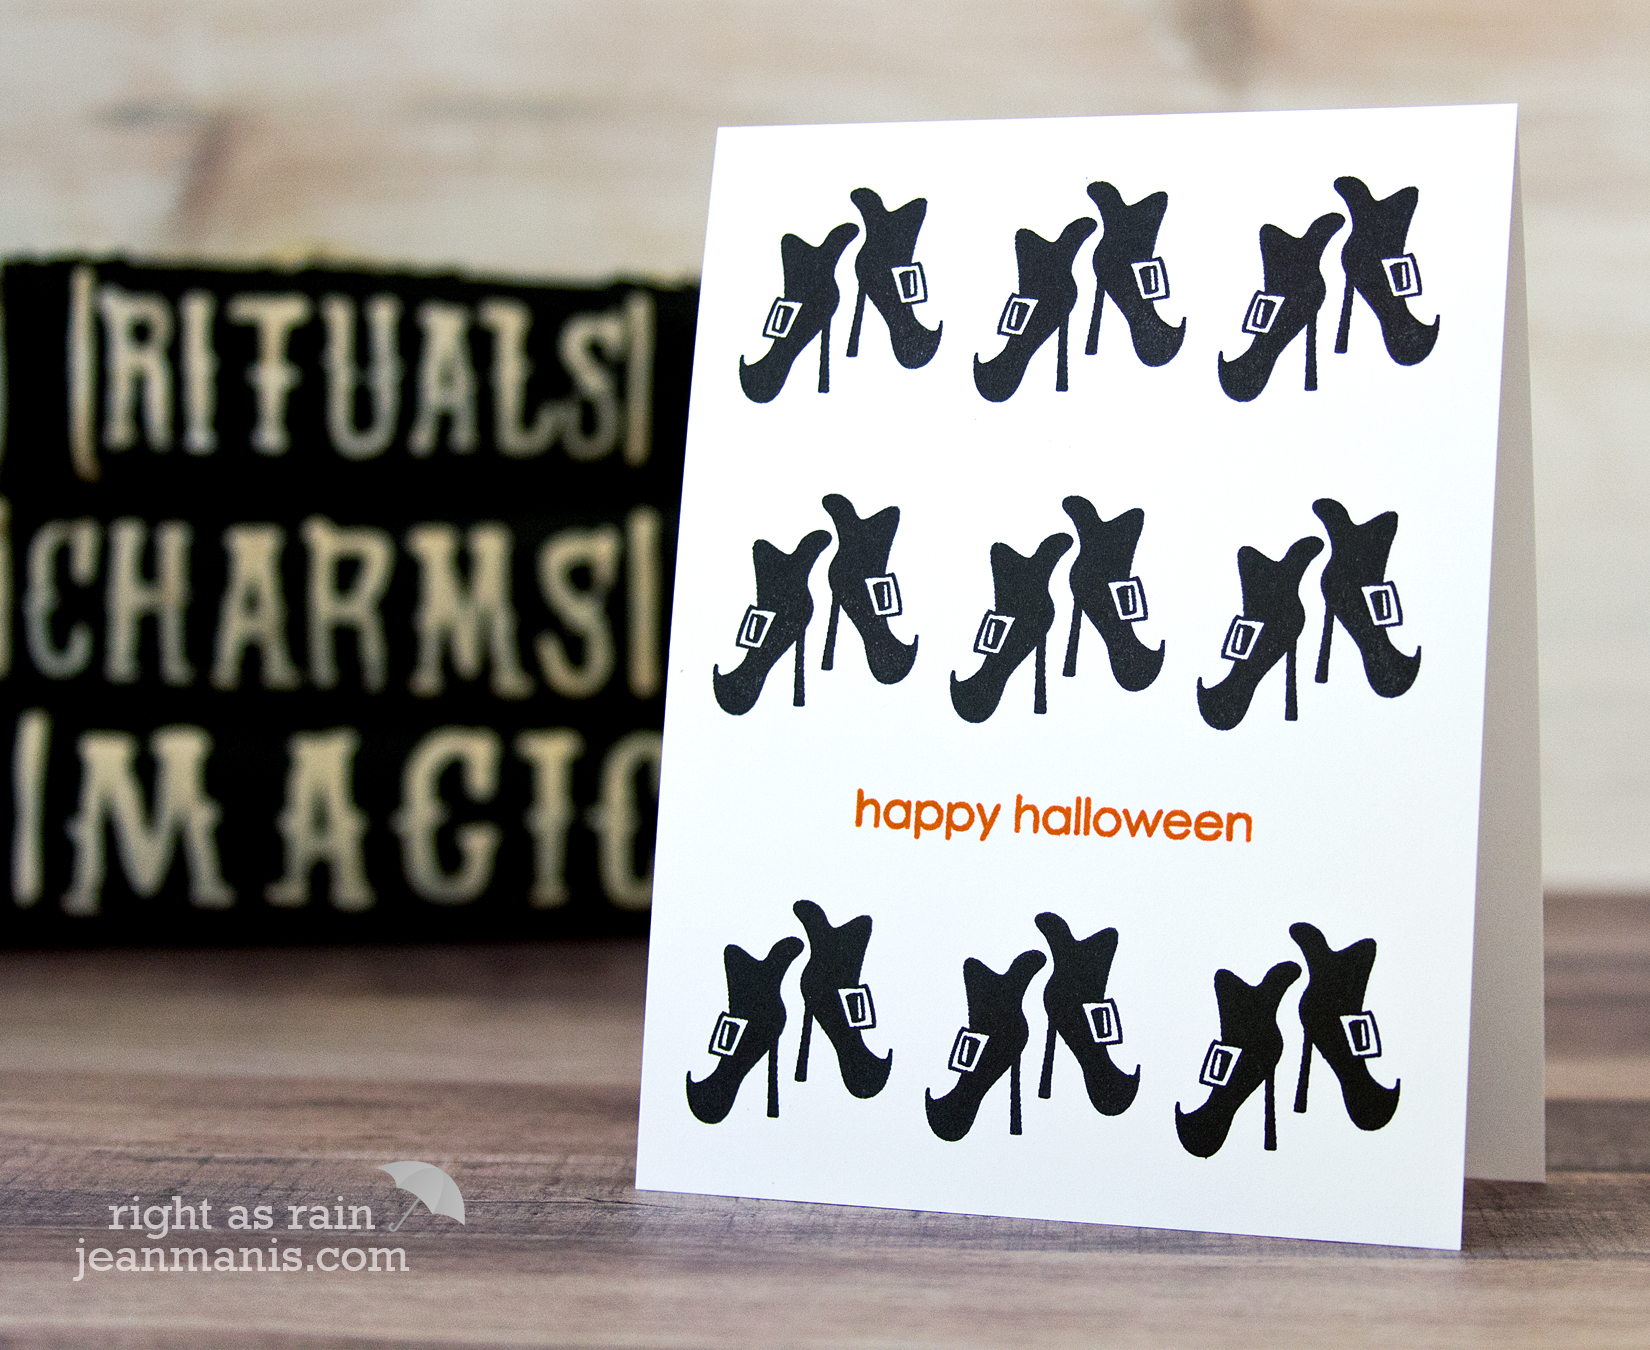 Exploring Card Background Options - White Cardstock